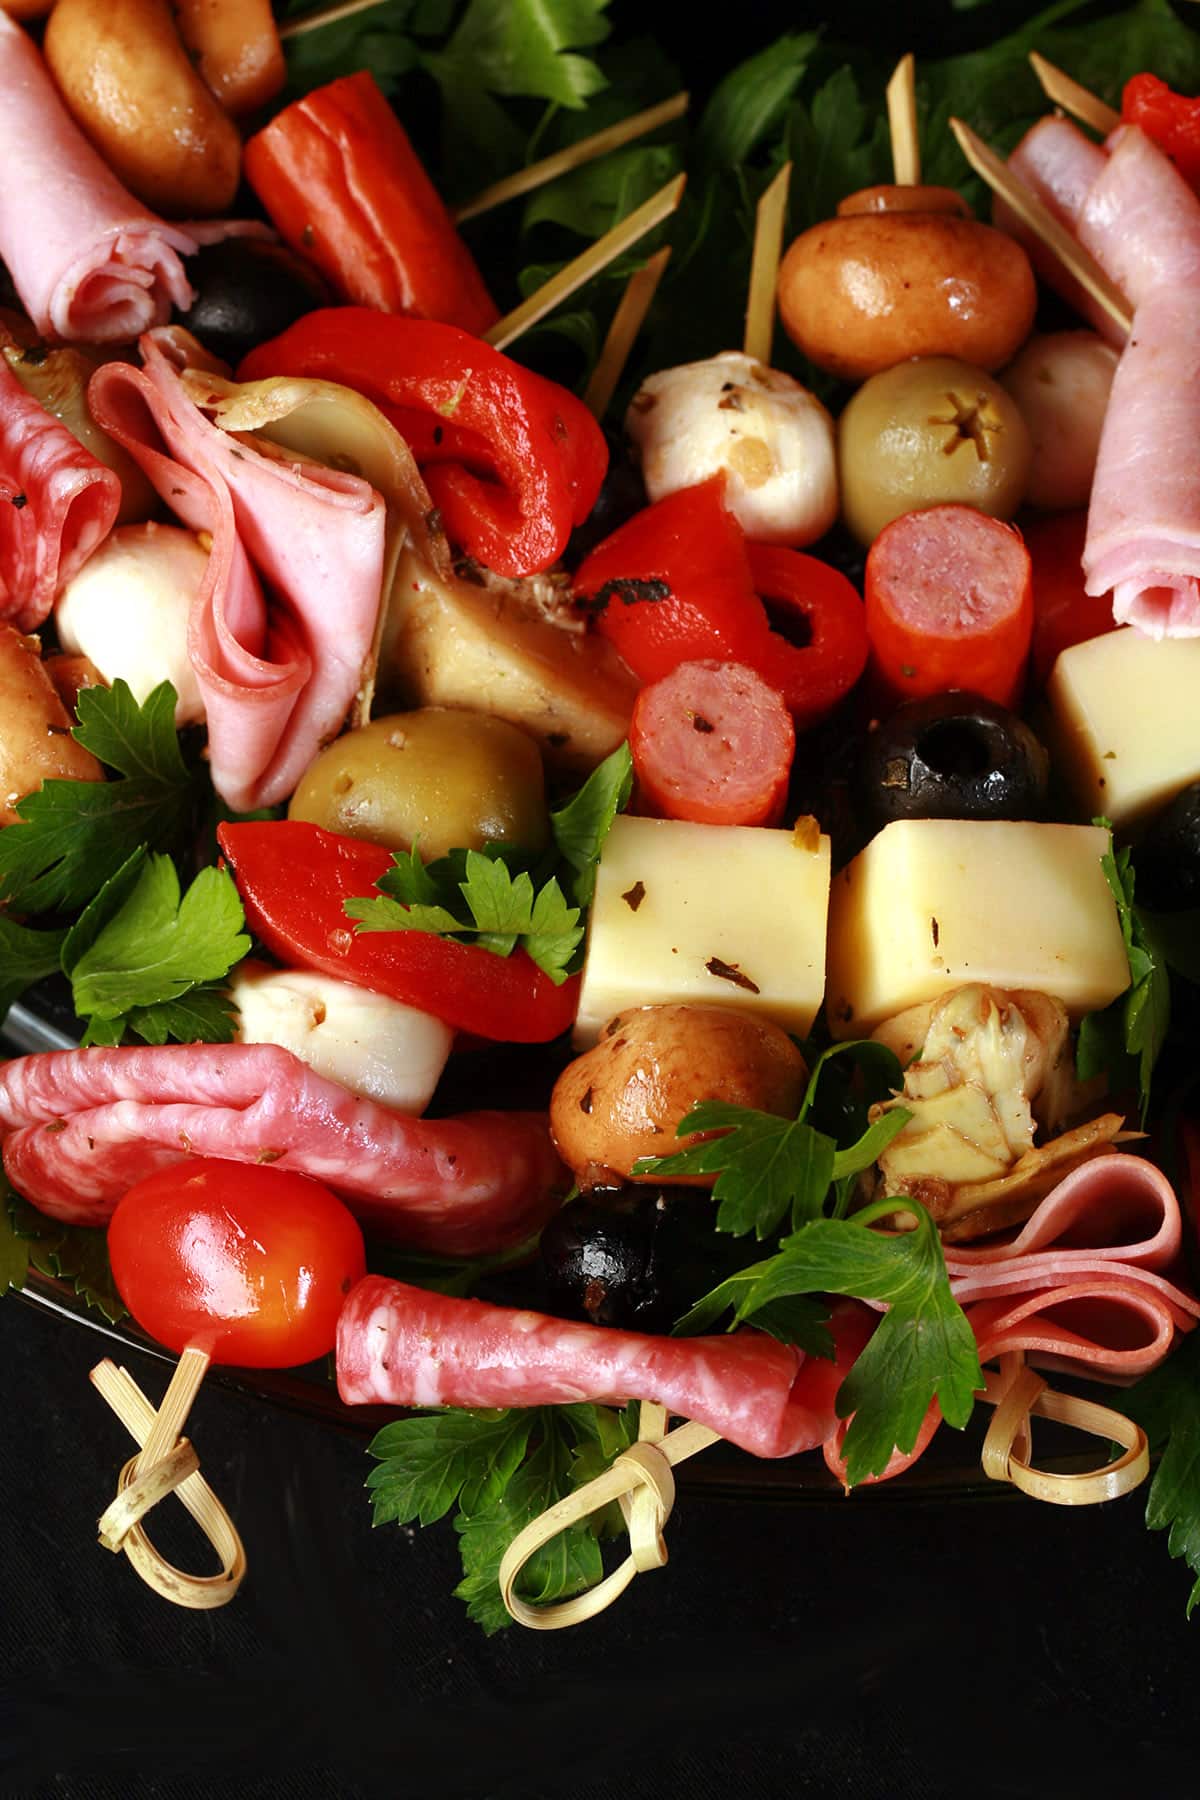 A charcuterie wreath, made up of antipasto skewers featuring various meats, cheeses, and olives.